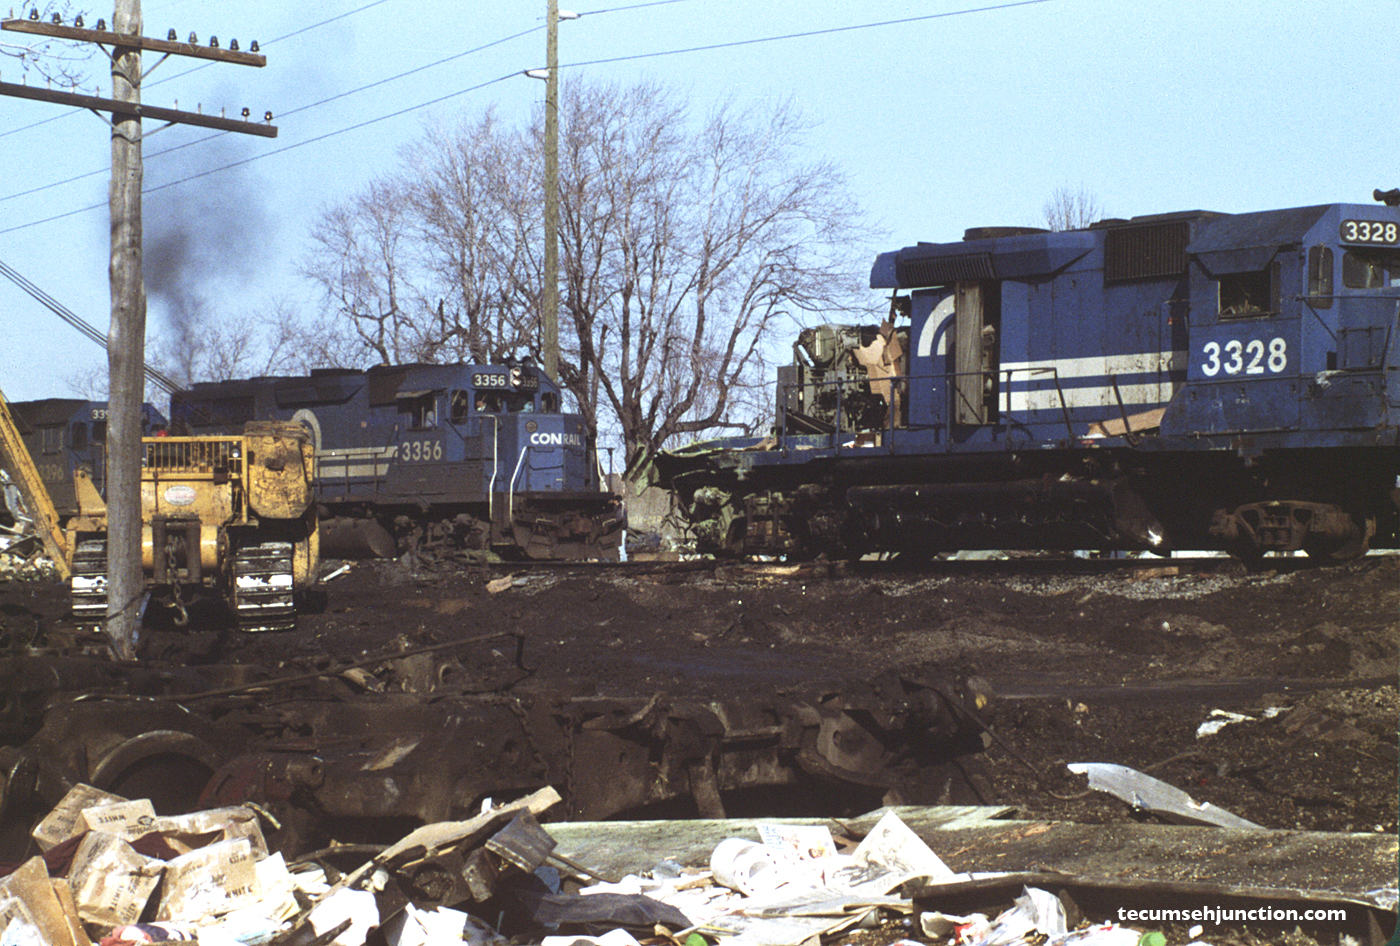 Conrail #3356 leads an eastbound train past the wreck site.